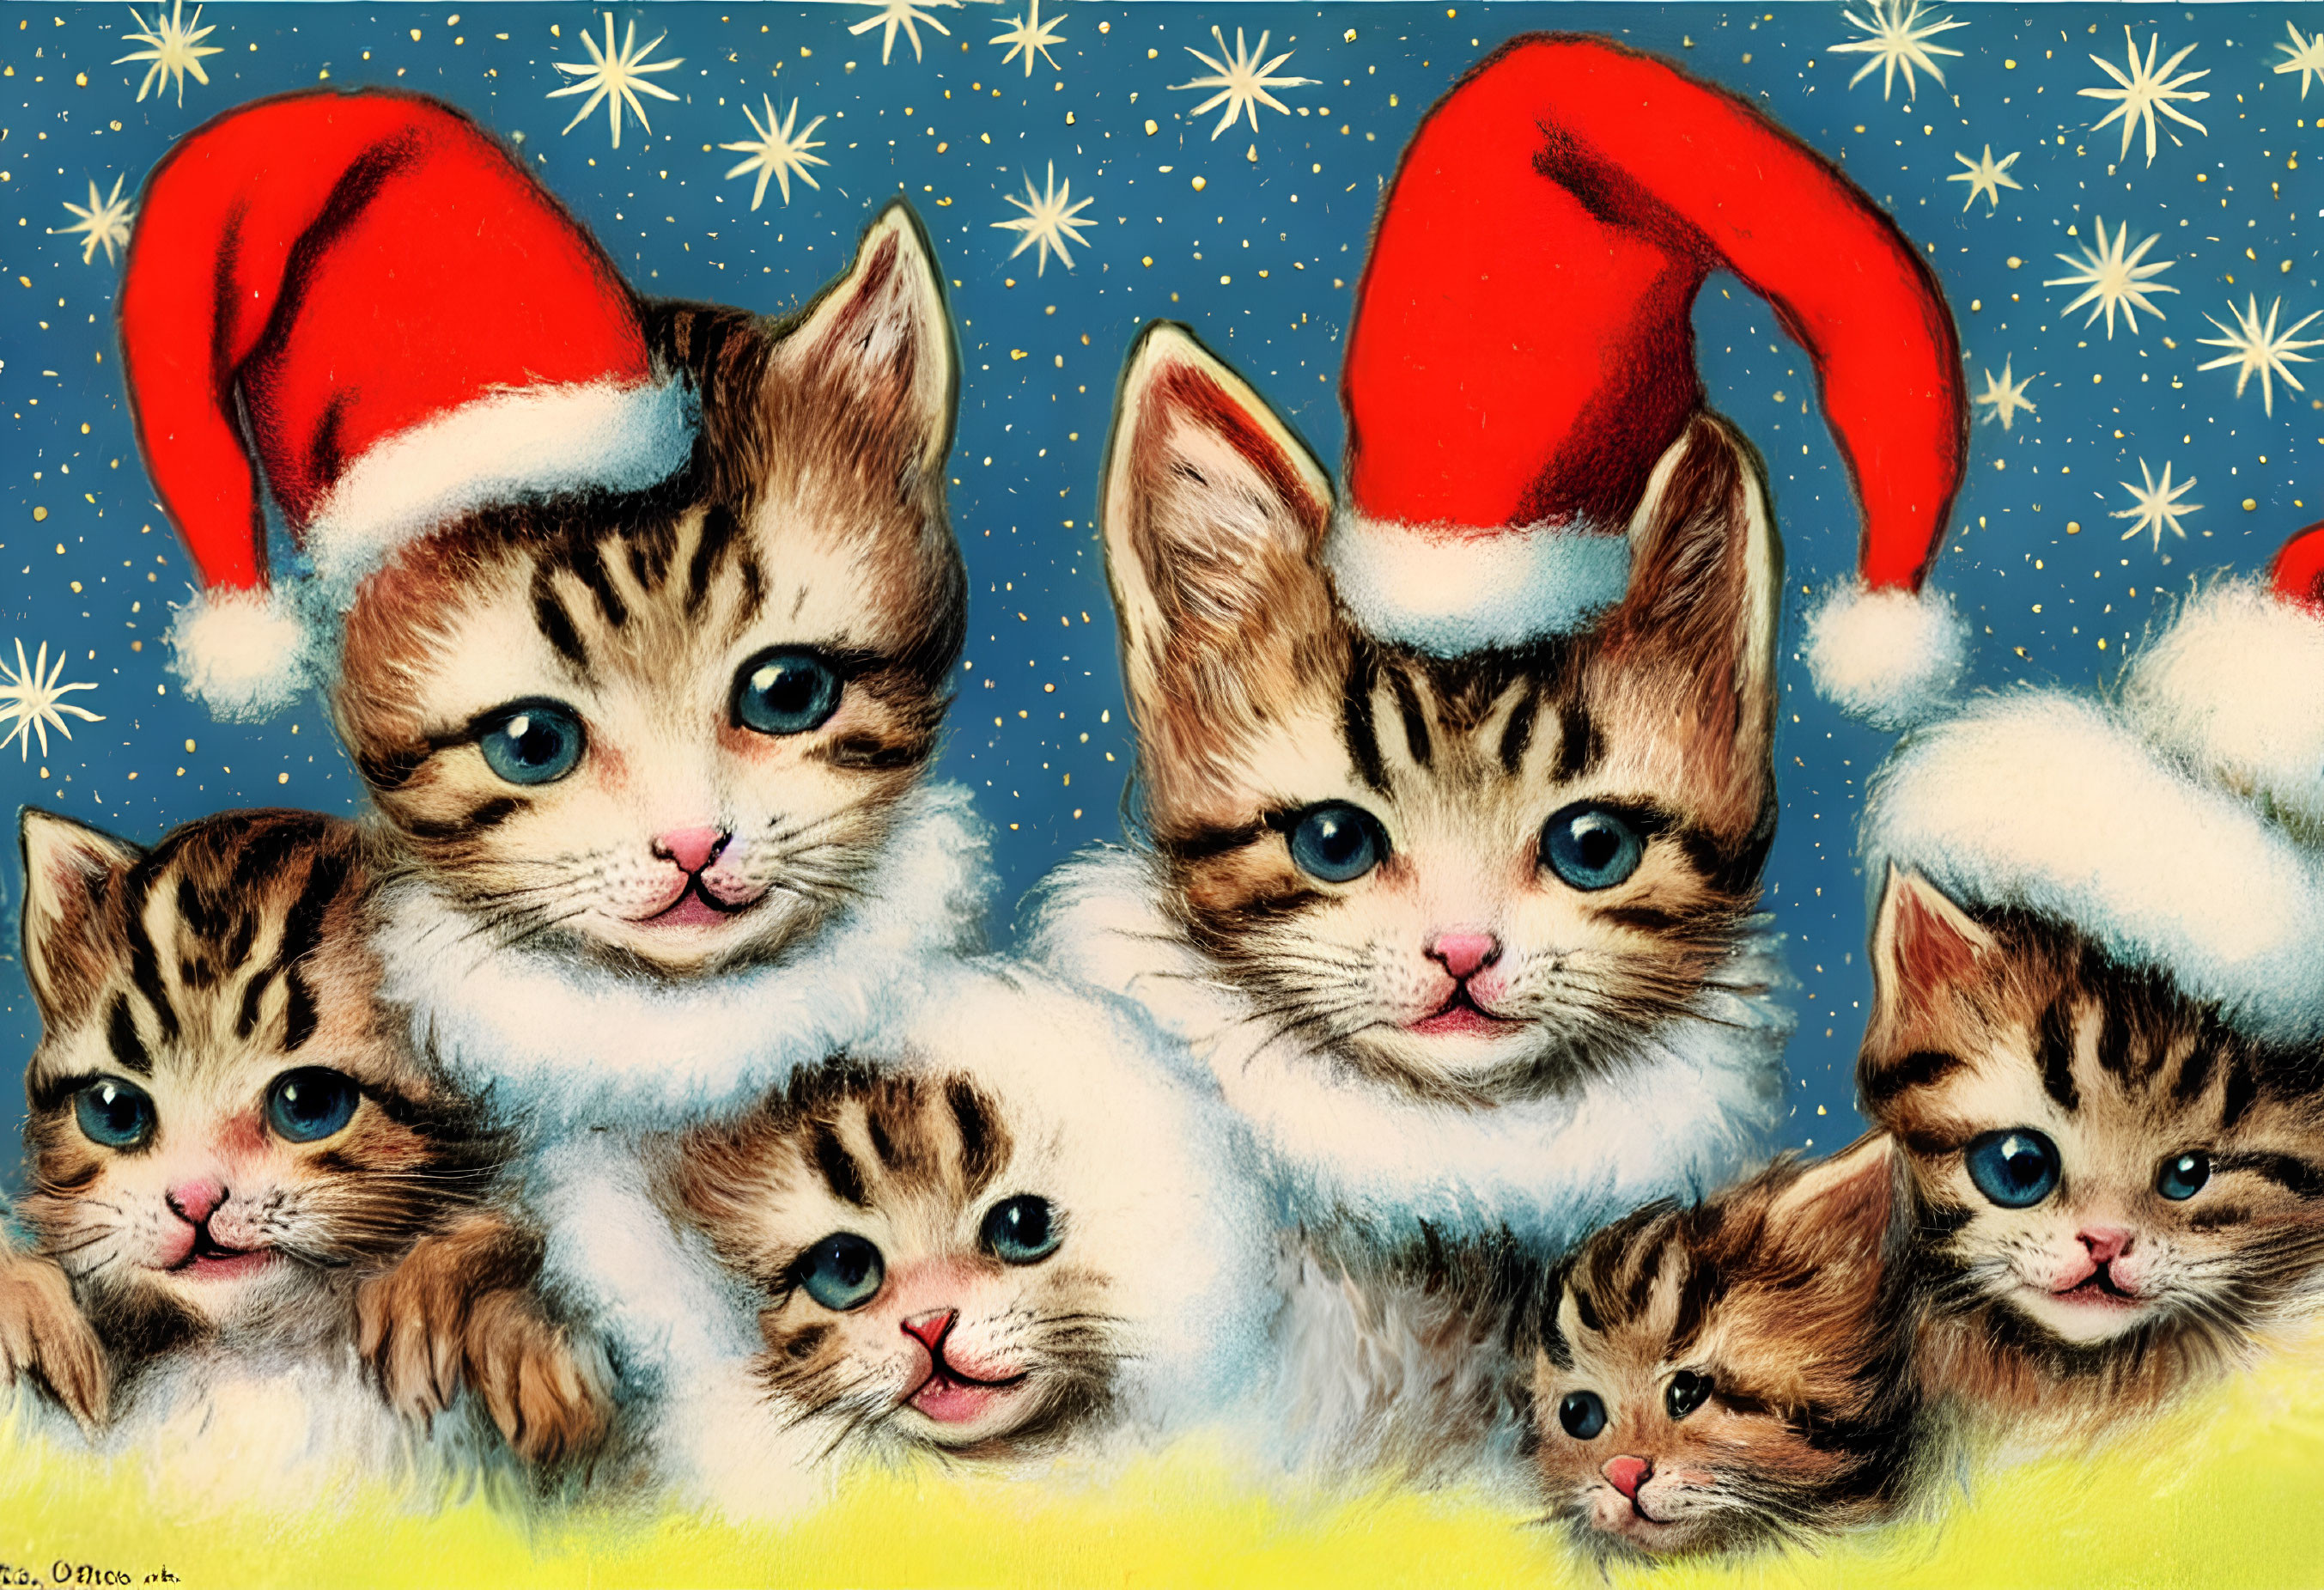 Five Kittens in Santa Hats and White Collars on Blue Starry Background